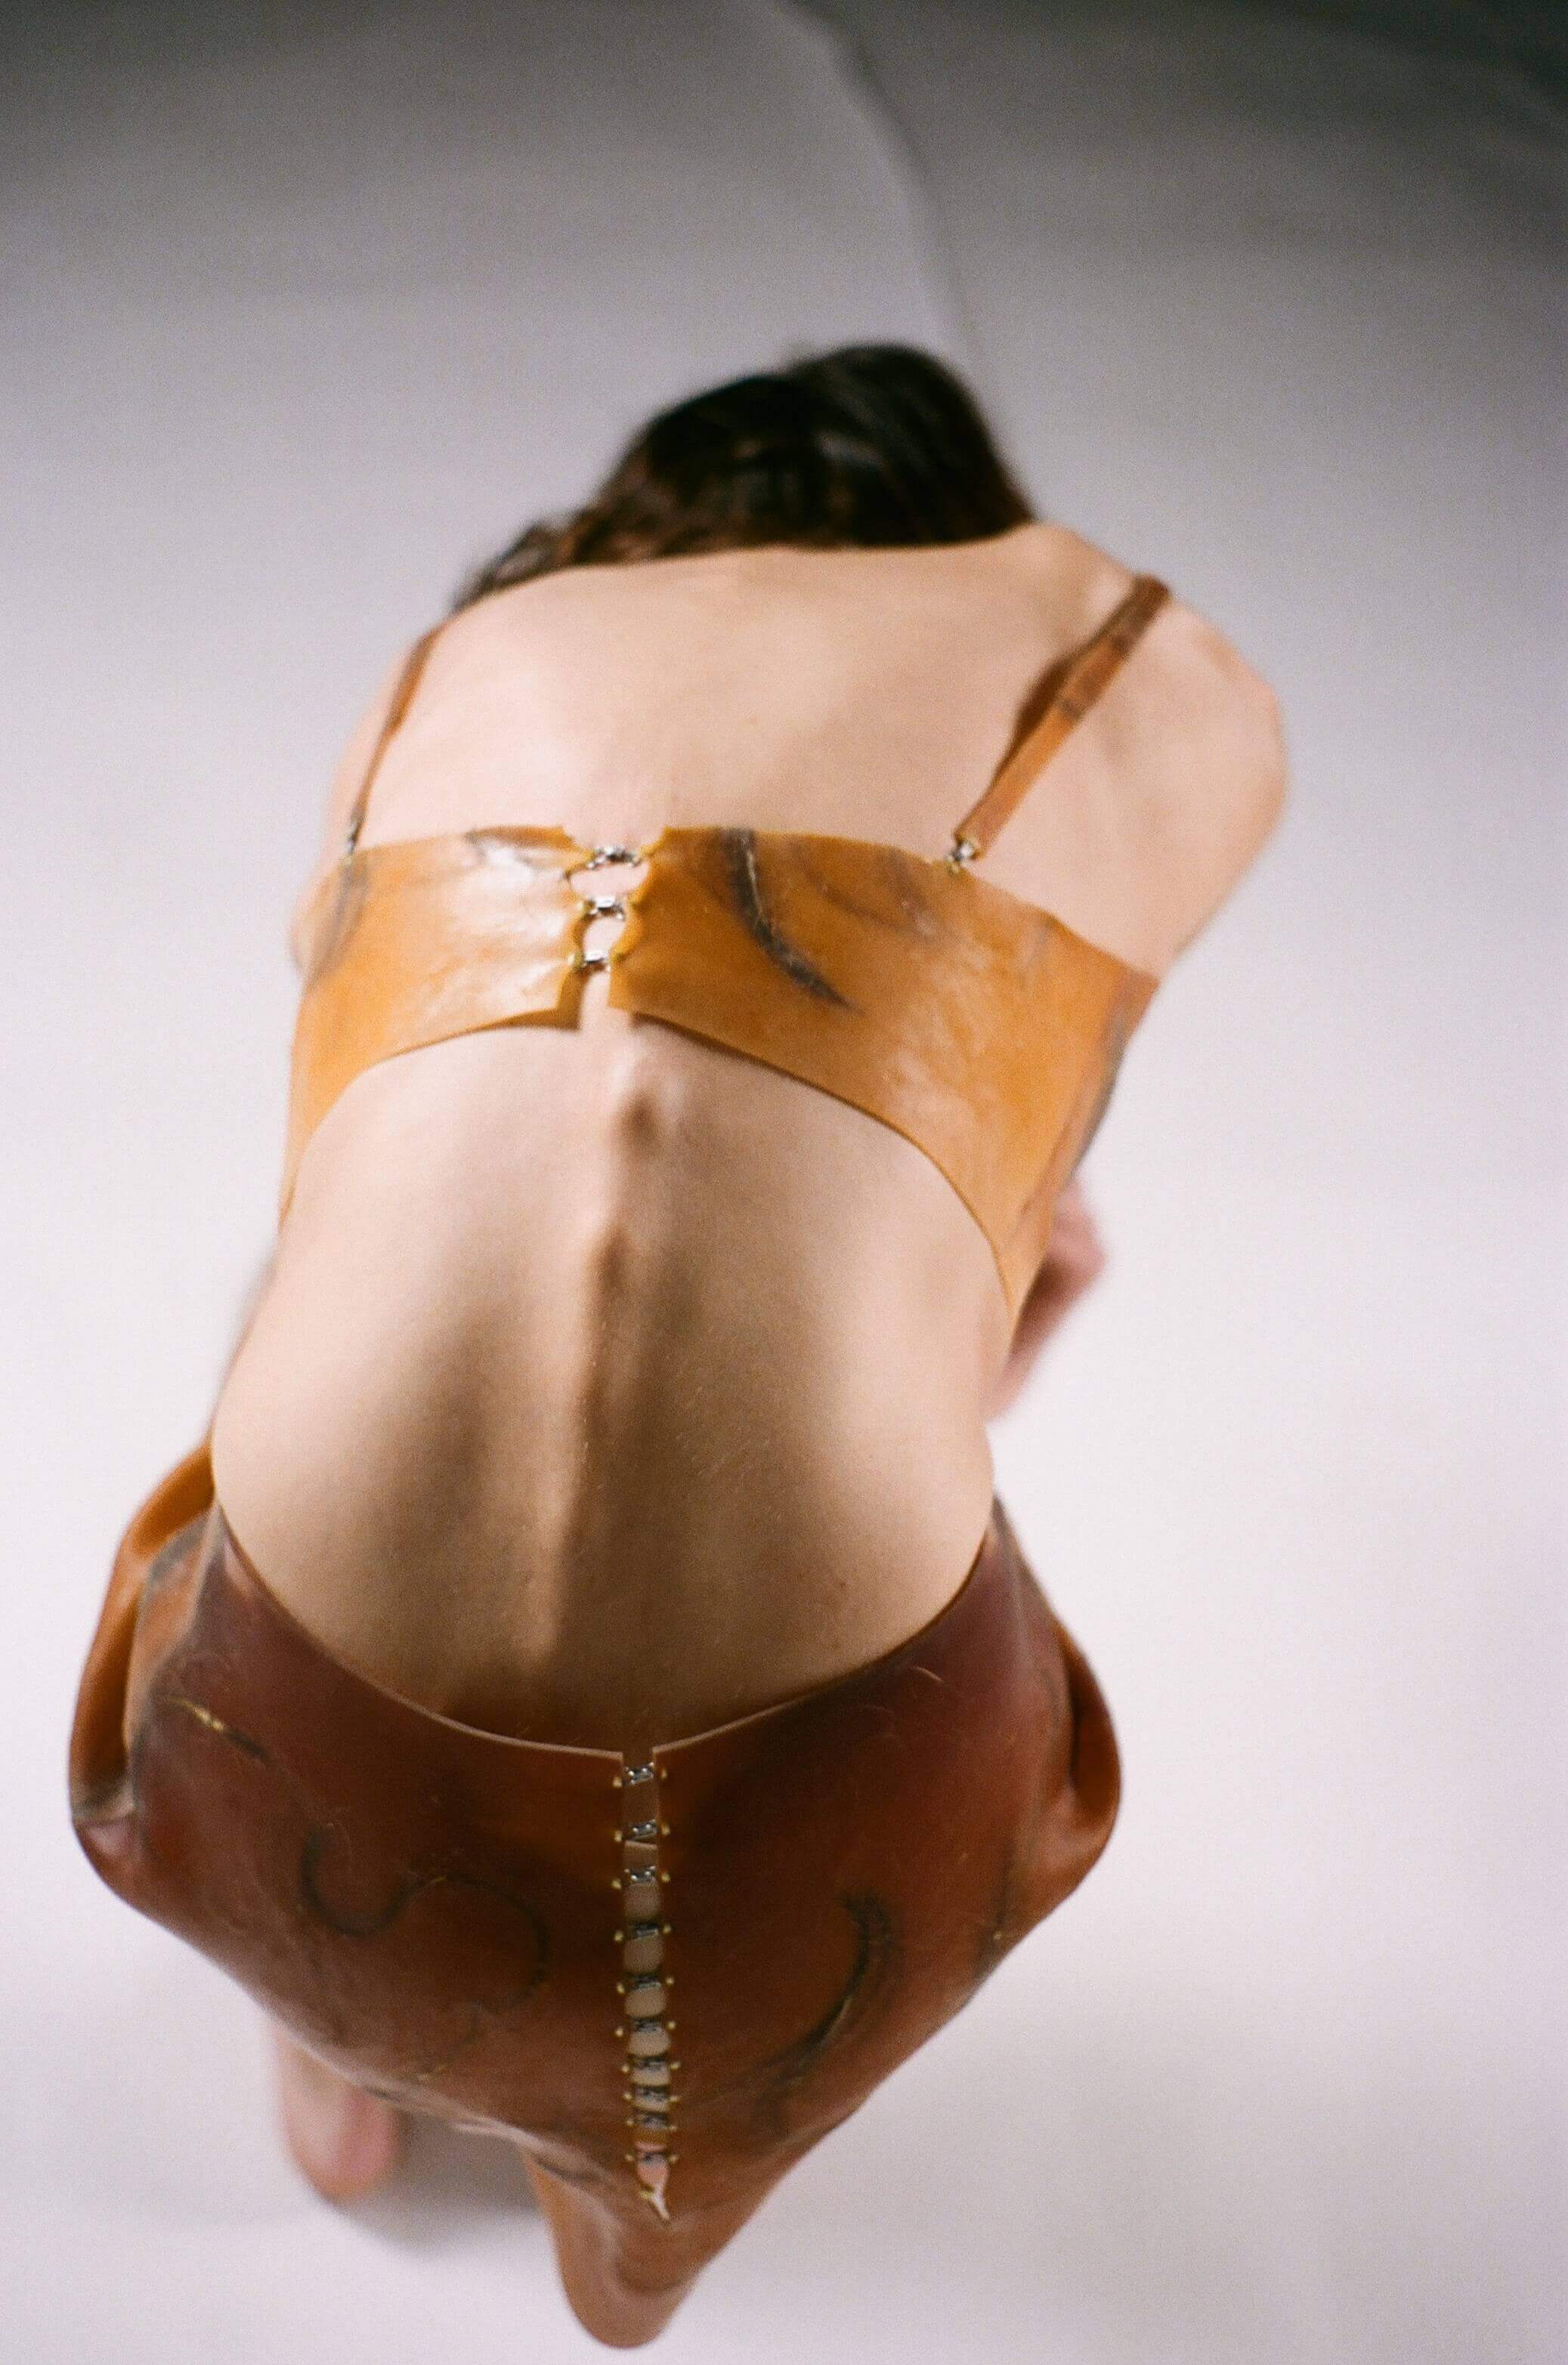 Top shot of the model bent over, their back facing the camera, their spine is the main focus of the shot